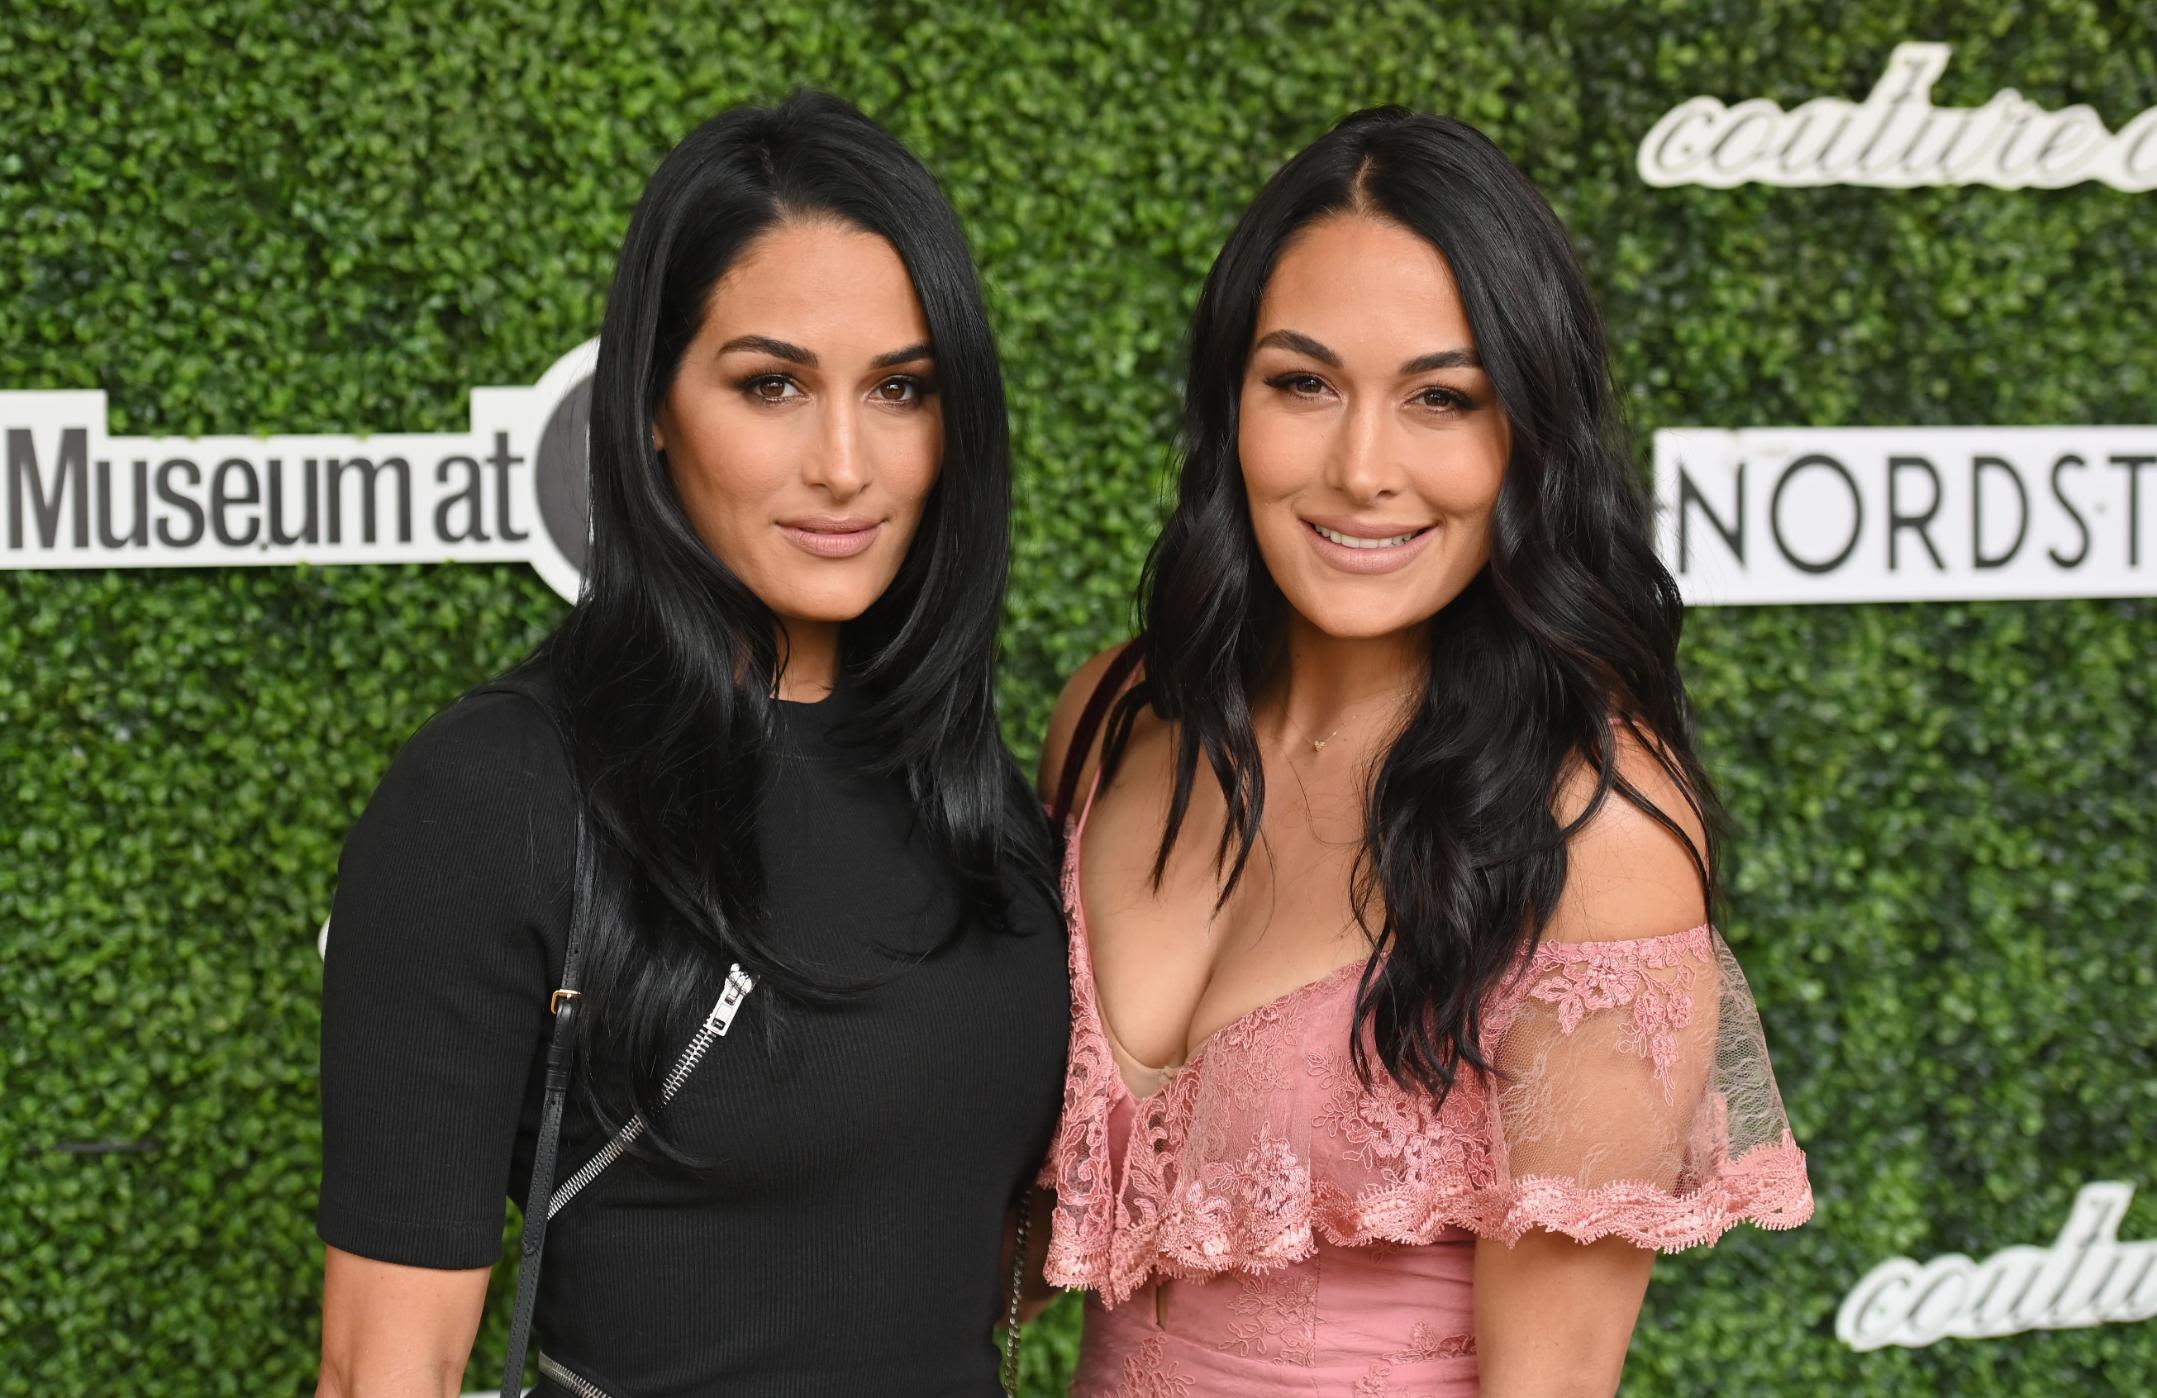 Nikki and Brie Bella welcome babies a day apart | CNN